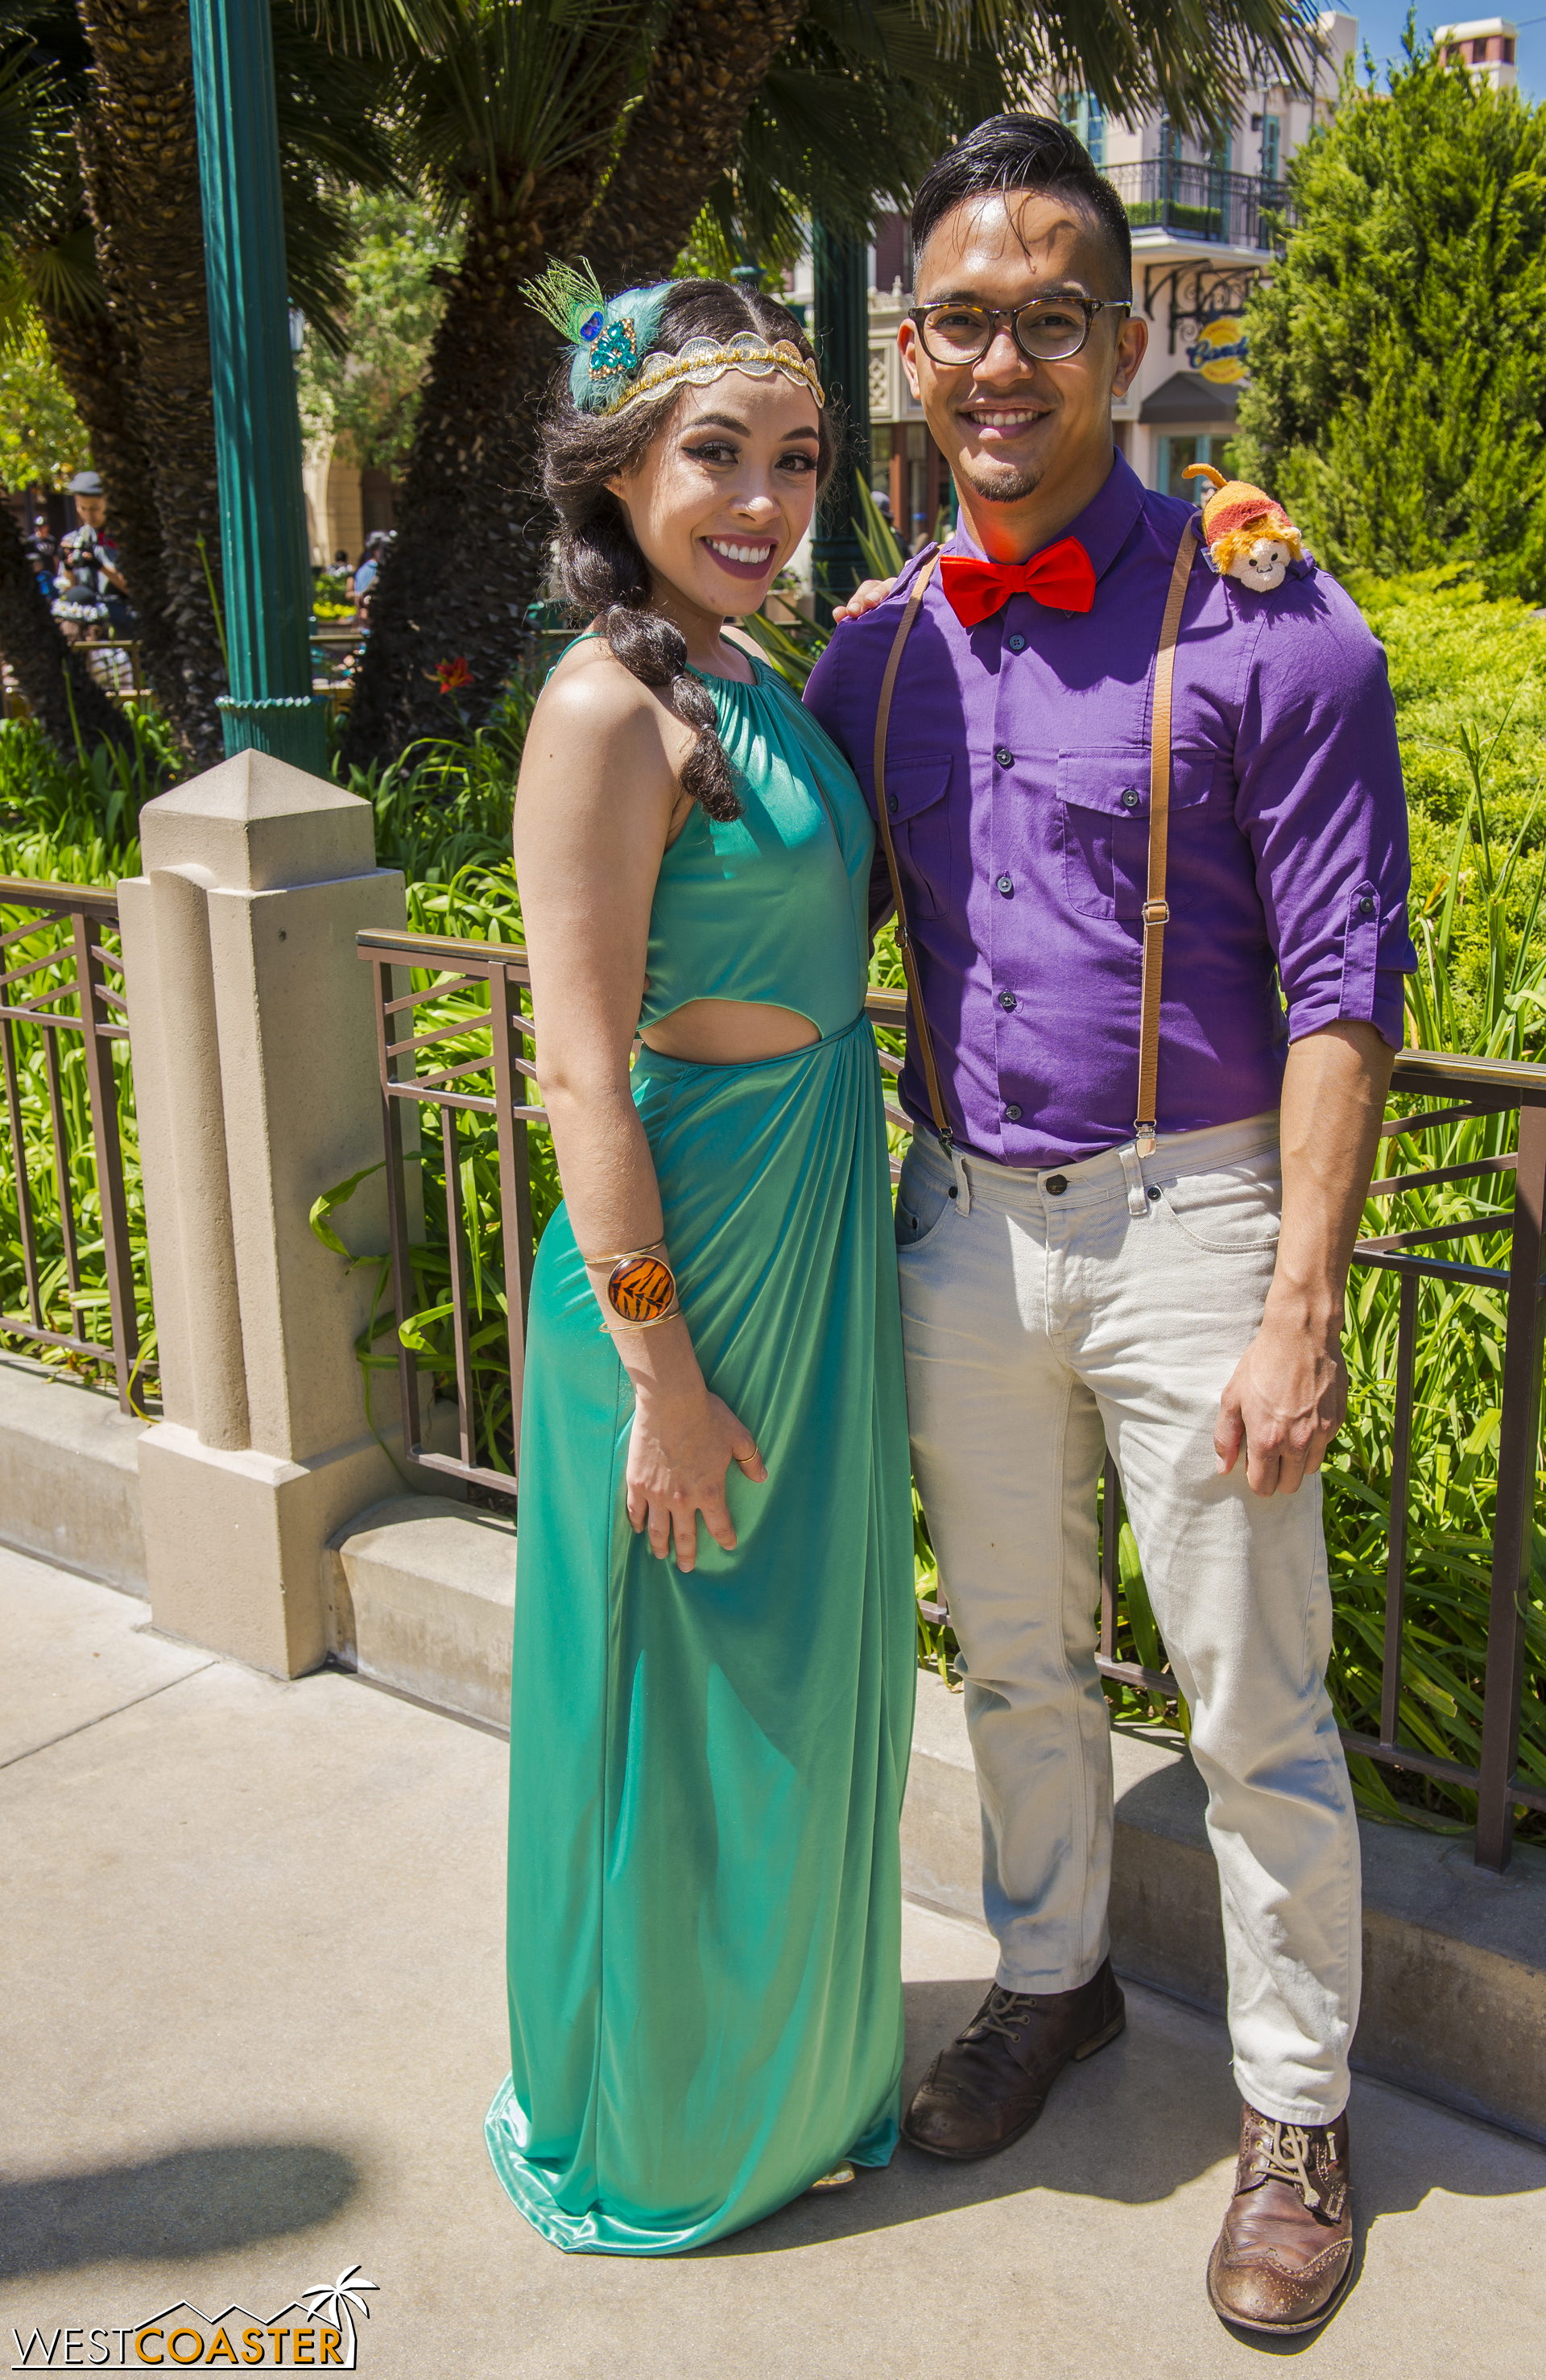  This Jasmine and Aladdin couple showcased the range of Disneybounding, from more ornate to derivative. 